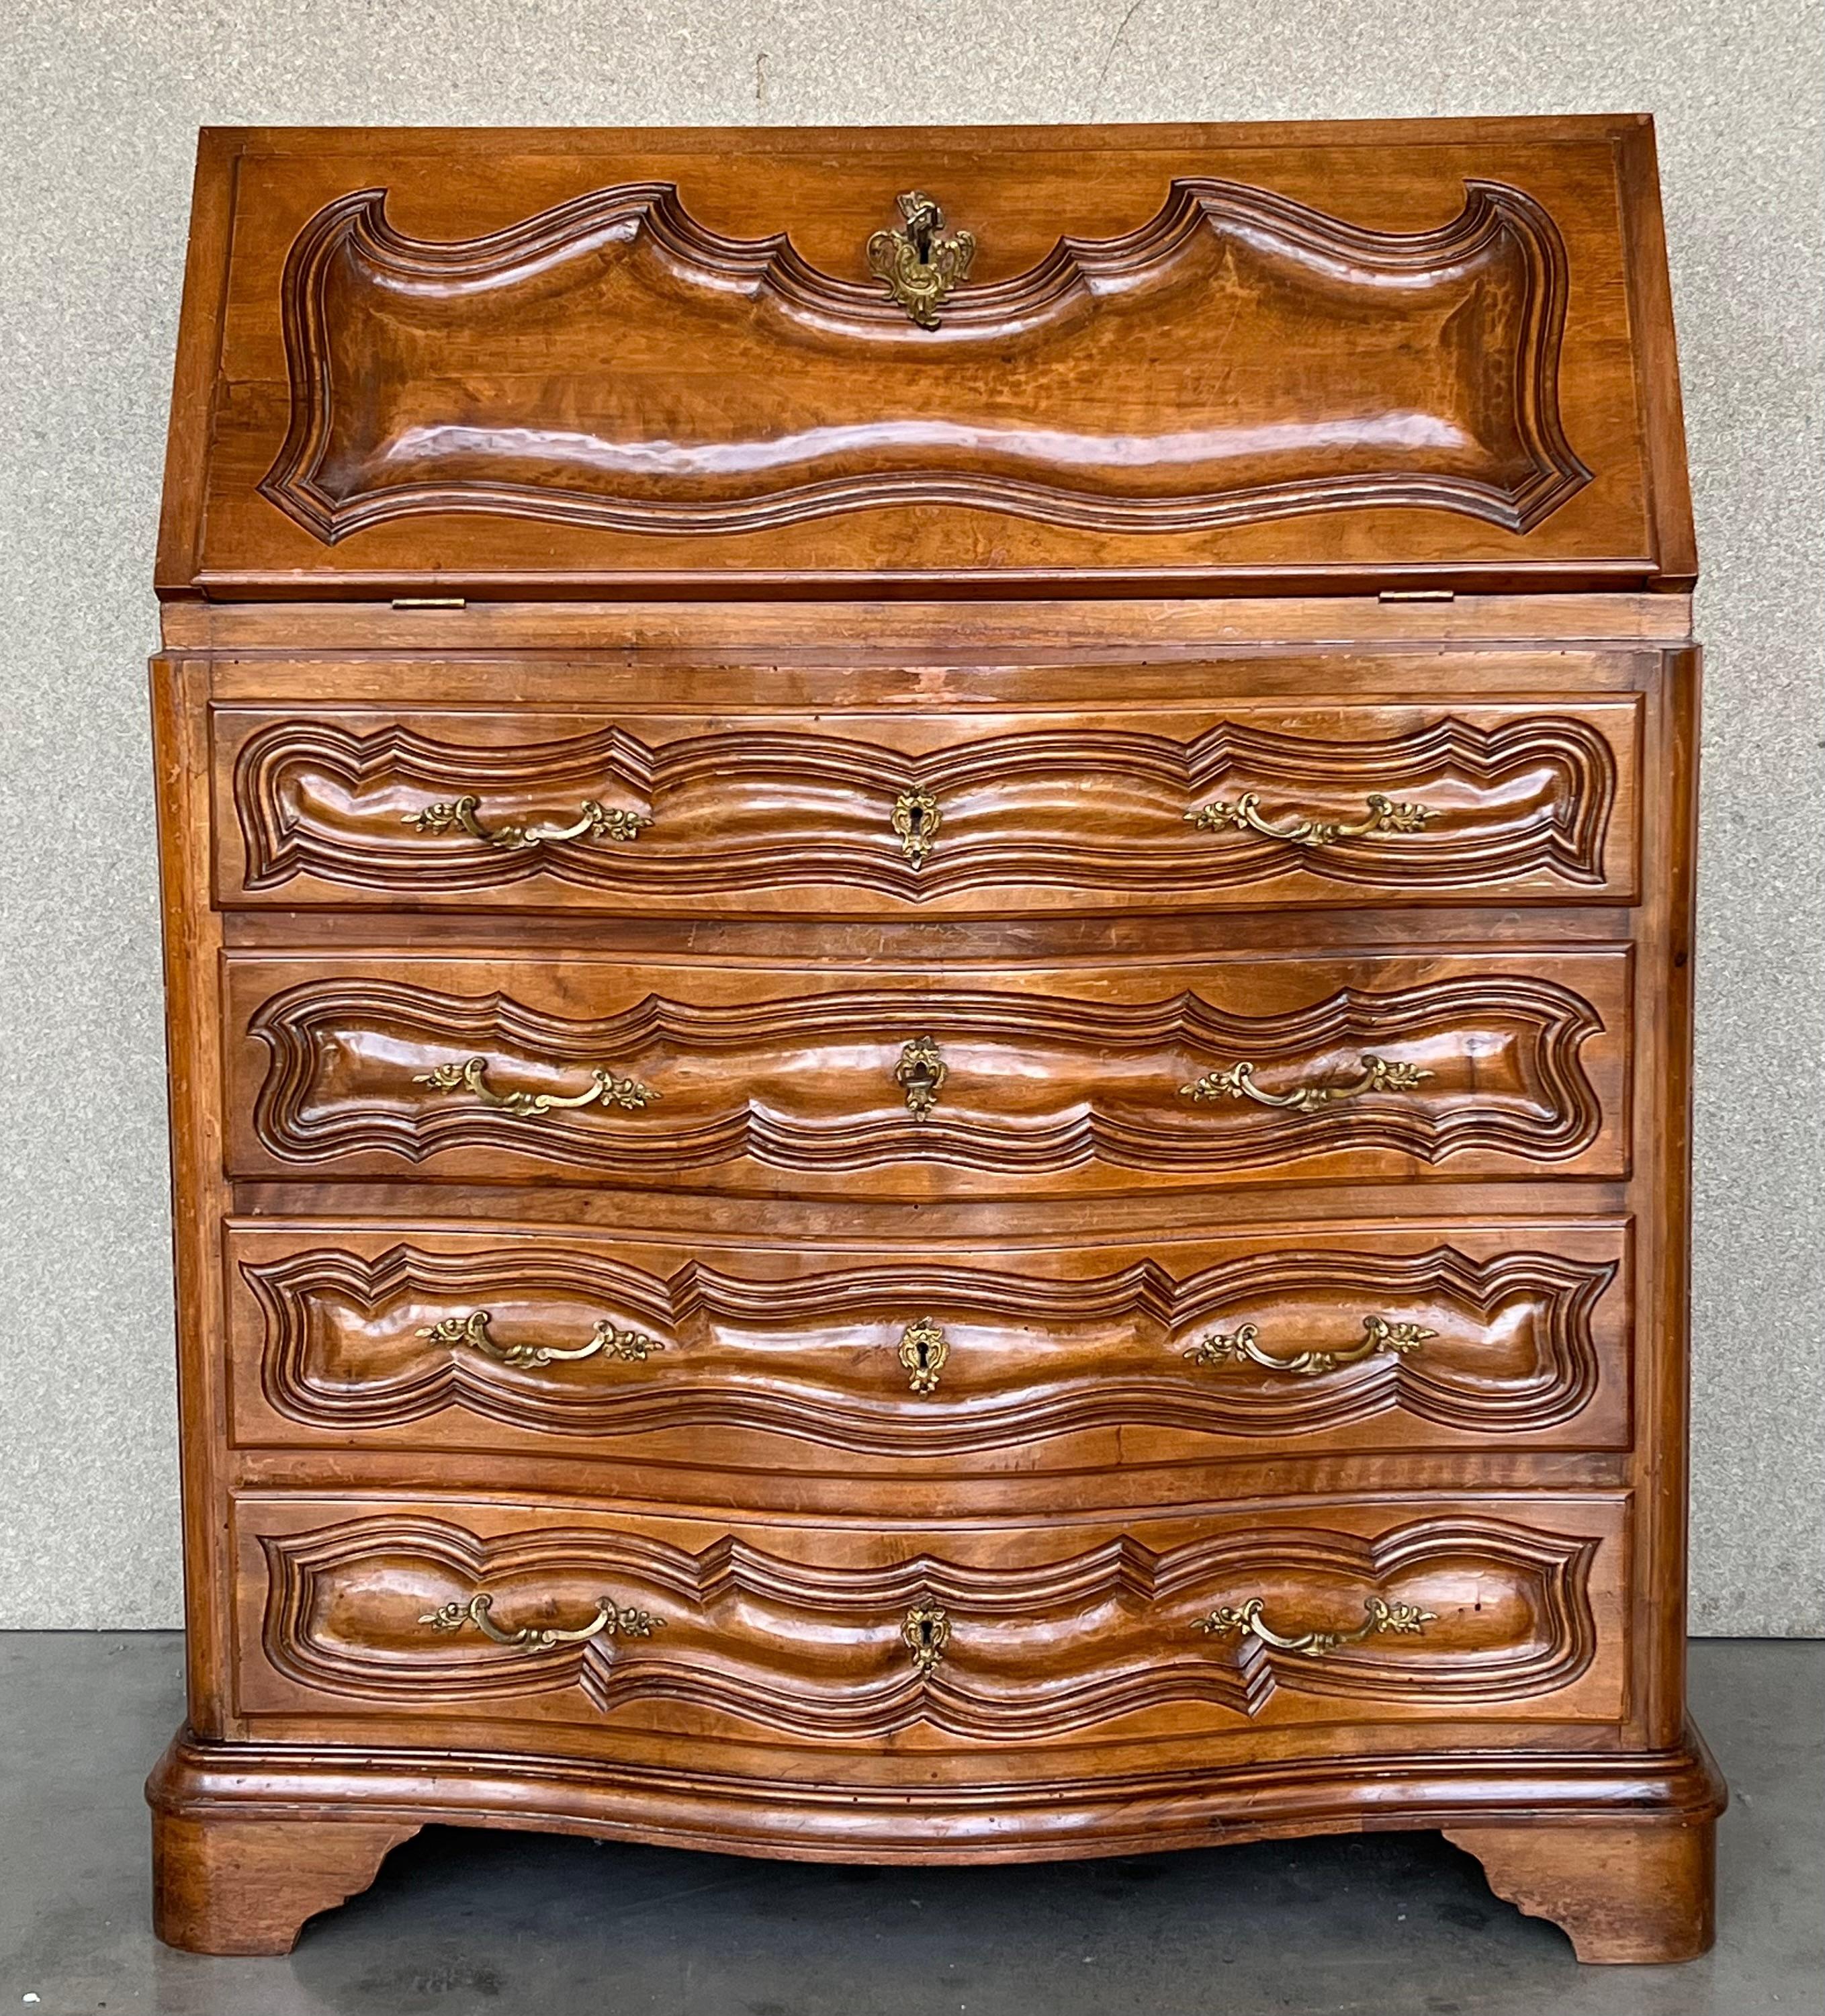 Mid 20th century walnut Spanish fall-front secretary with molded carvings in drawers and doors.


Measures: Total deep when the leaf is open : 27.55in
Height from the floor to the open leaf: 29.52in.